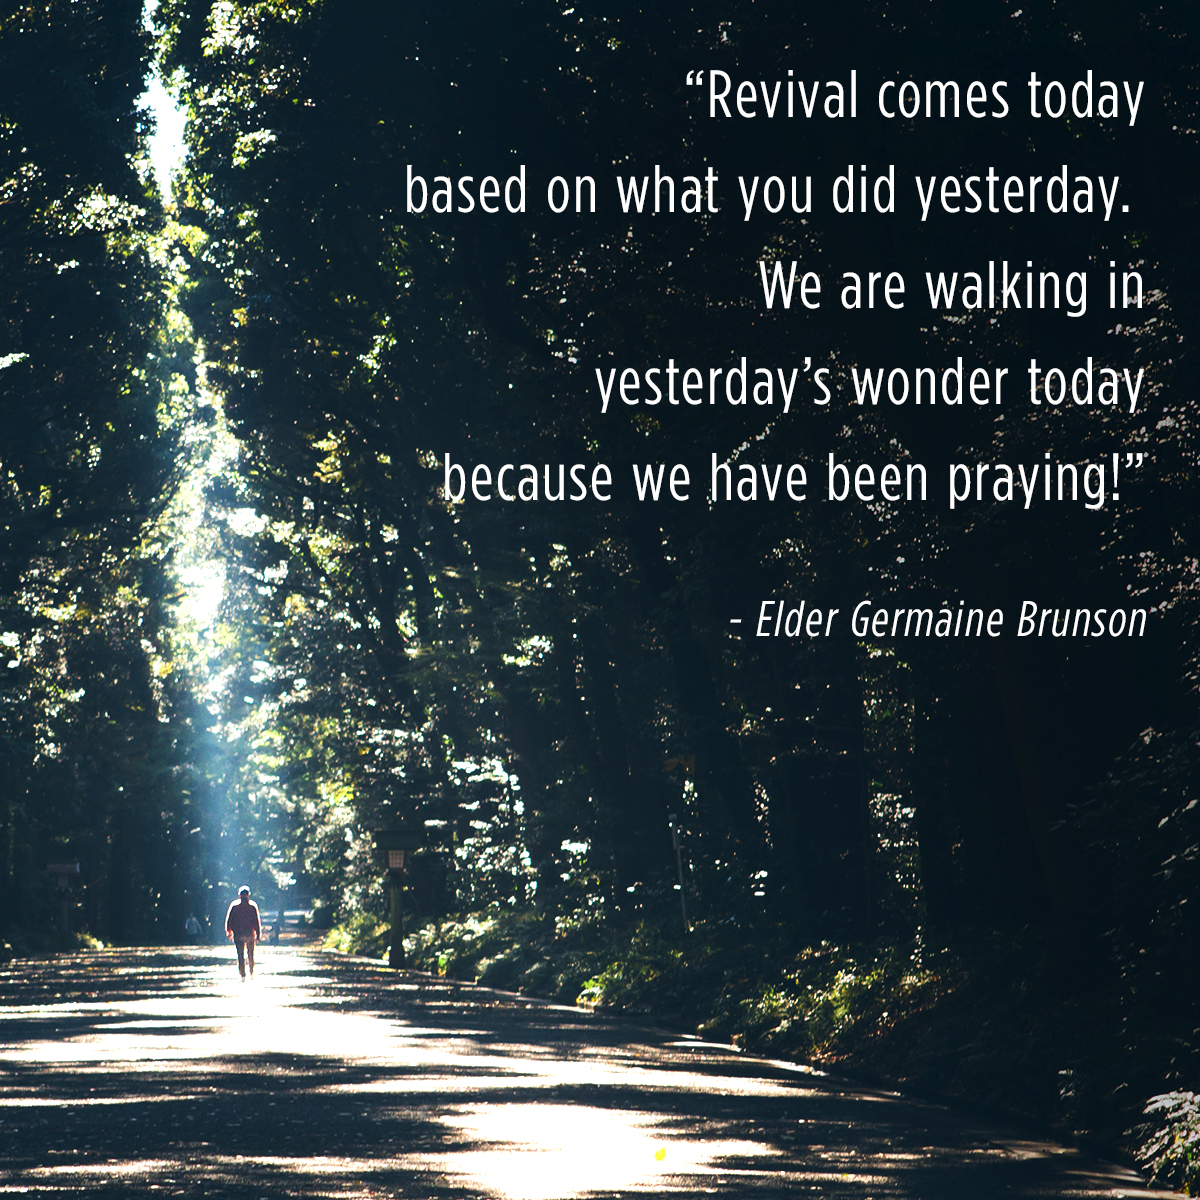 “Revival comes today based on what you did yesterday. We are walking in yesterday’s wonder today because we have been praying!” – Elder Germaine Brunson